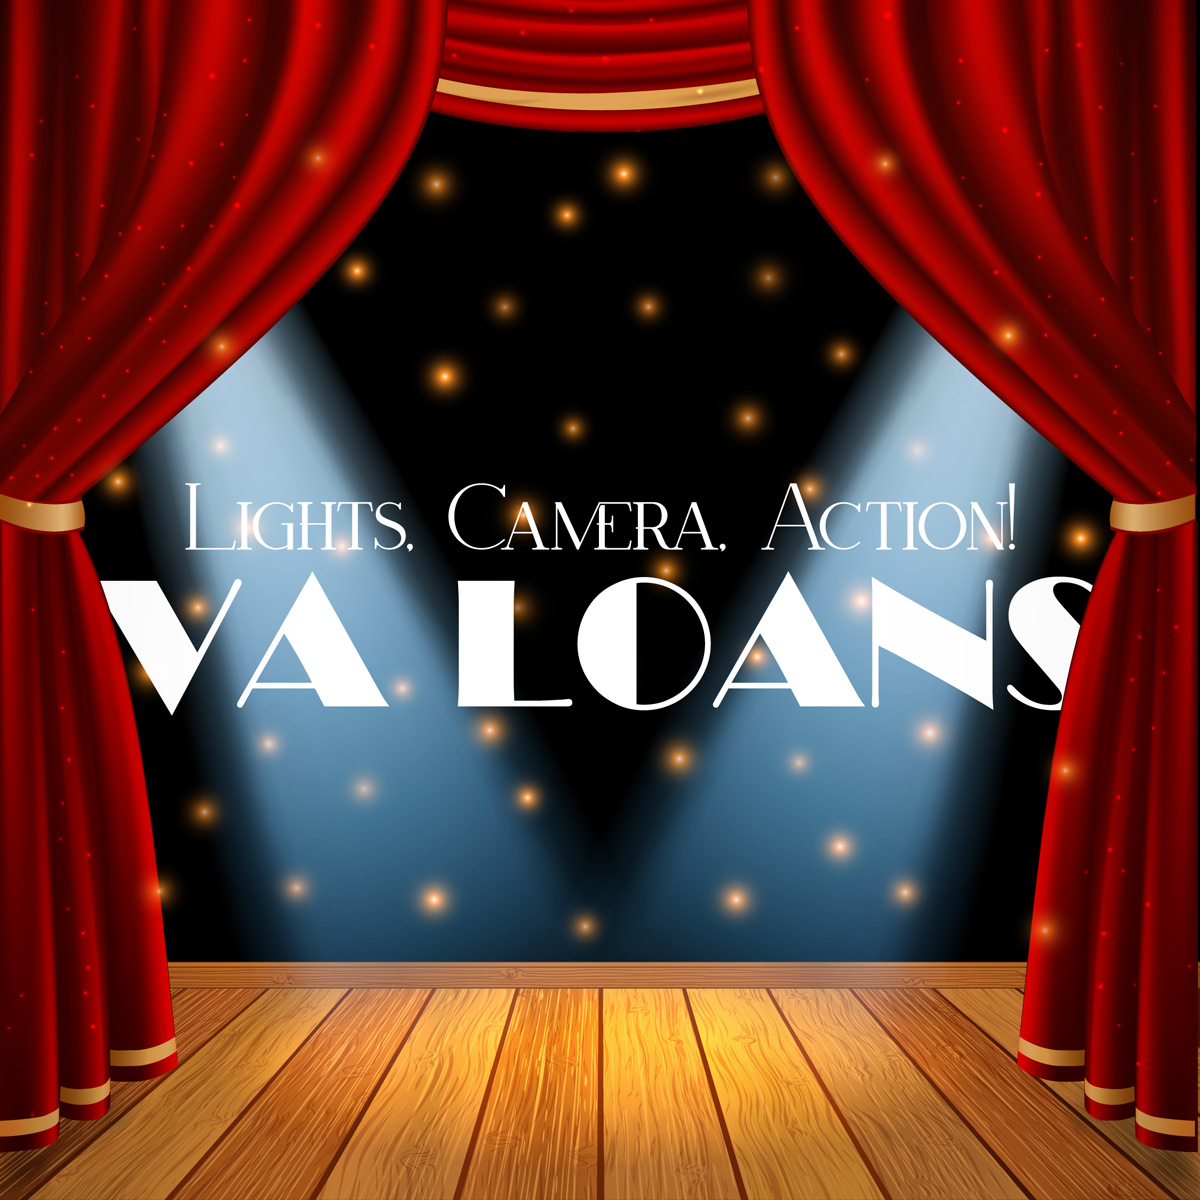 Attention veterans and active service members, I can help you achieve home ownership with VA loans. Let's work together to make your dream home a reality. Contact me to get started. #VALoans #Homeownership #Veterans #MilitaryHomebuyers